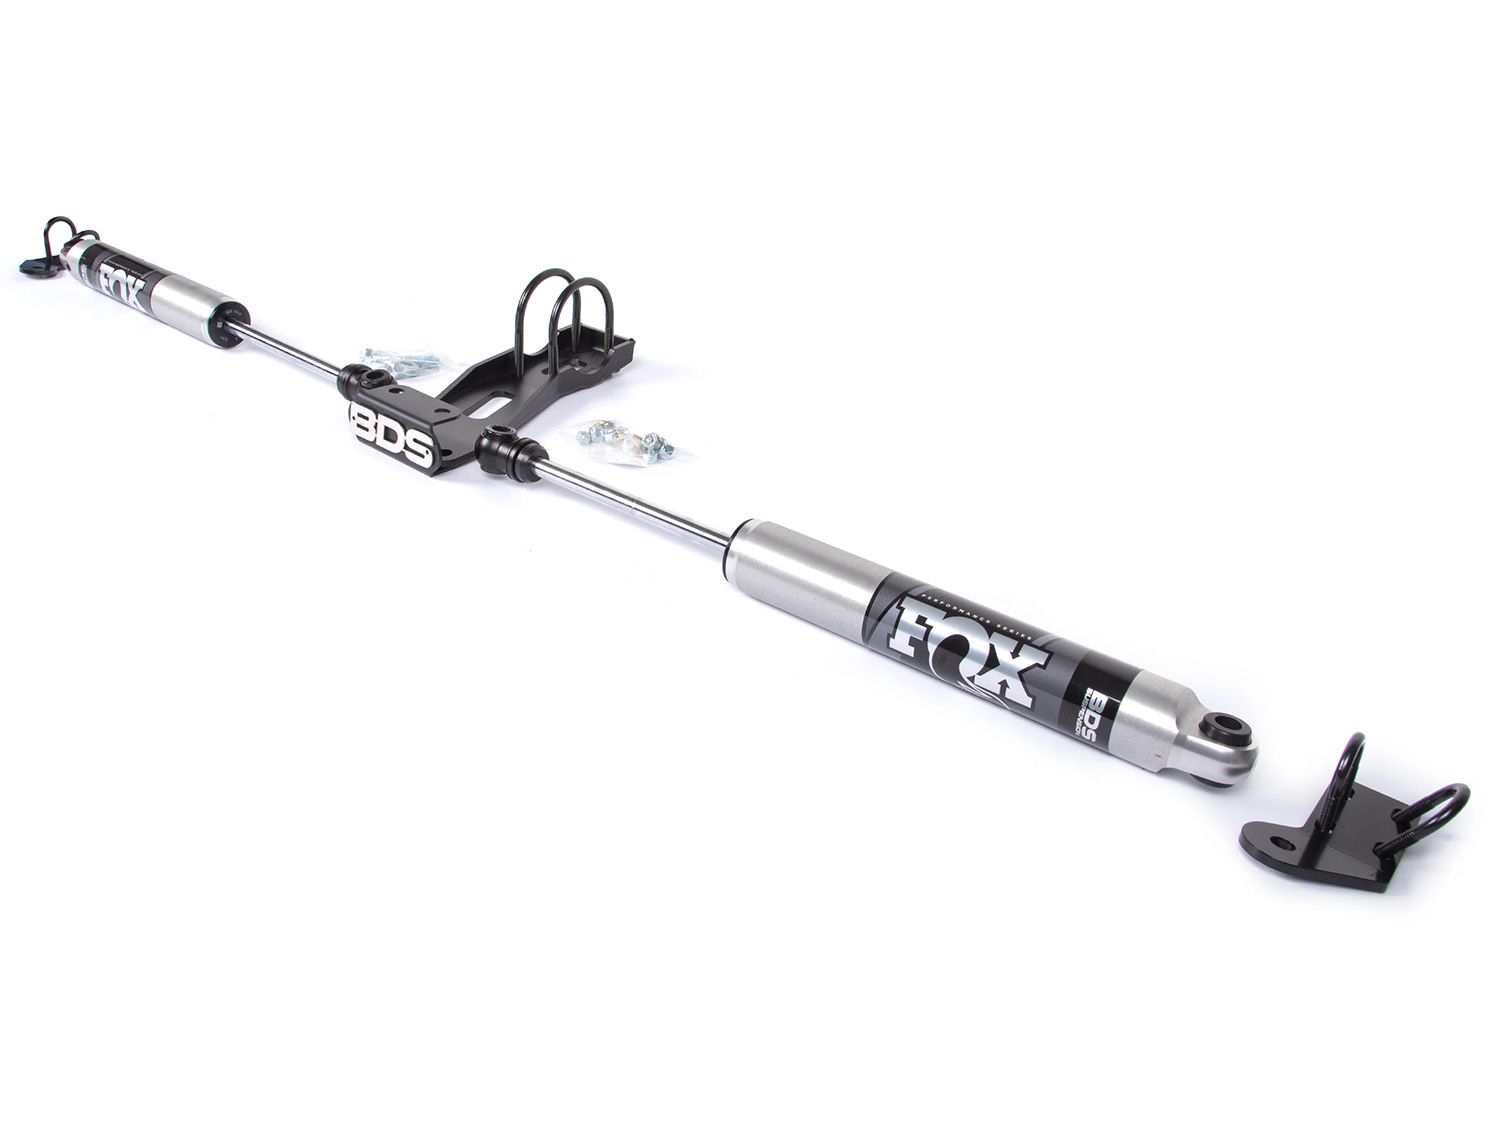 Suburban 1/2 & 3/4 ton 1973-1991 Chevy/GMC 4WD - Fox Dual Steering Stabilizer by BDS